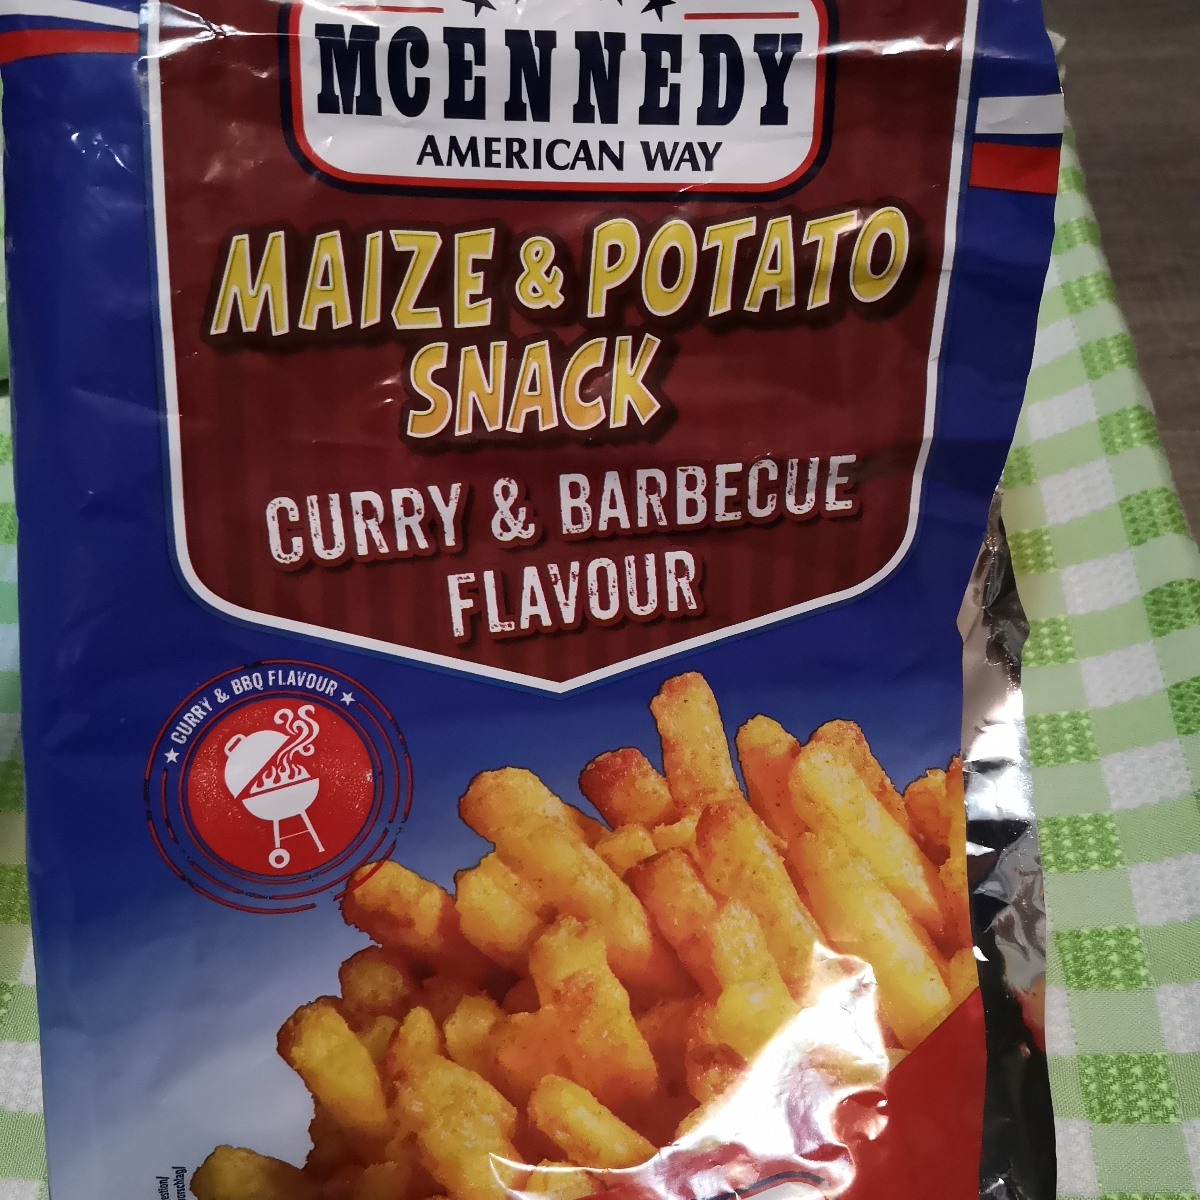 Mcennedy Maize and potato snack Curry and Barbecue flavor Reviews | abillion